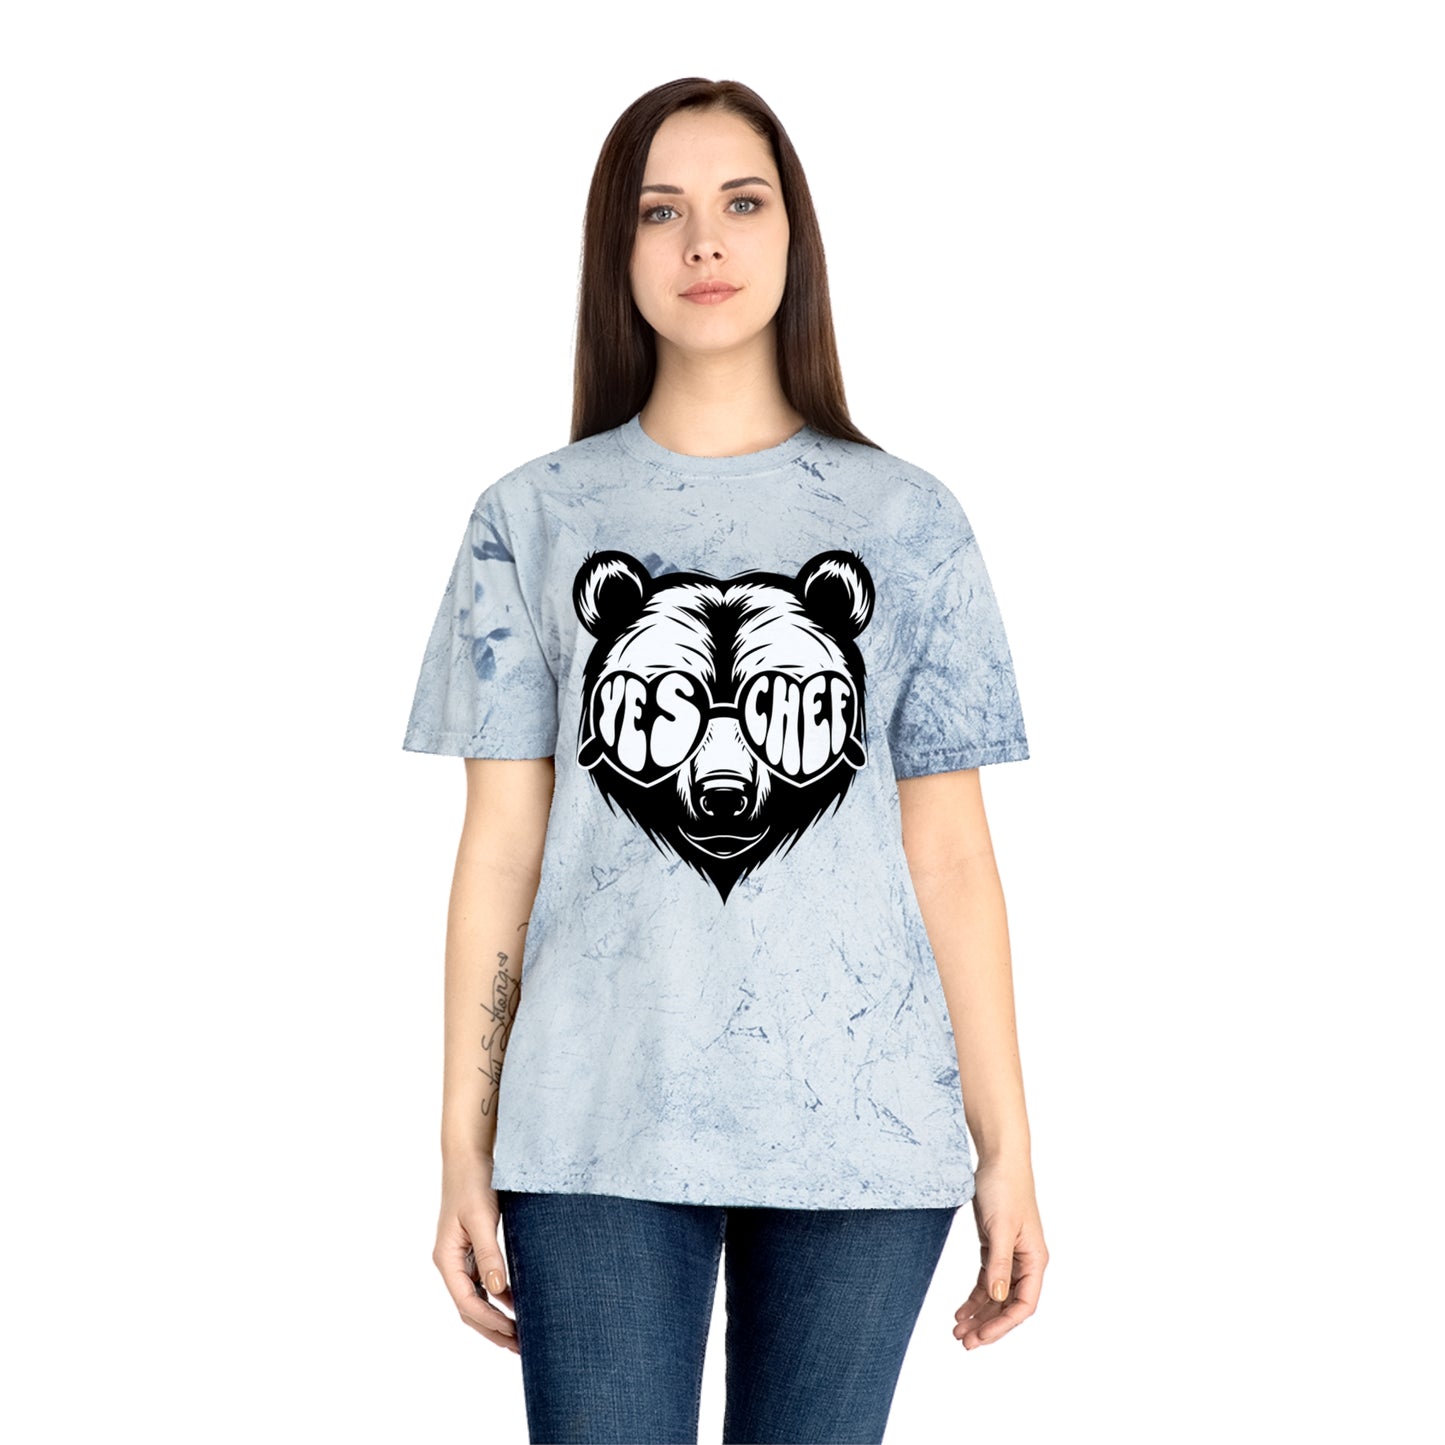 Yes Chef Bear Shirt, Comfort Colors, Line Cook, Restaurant